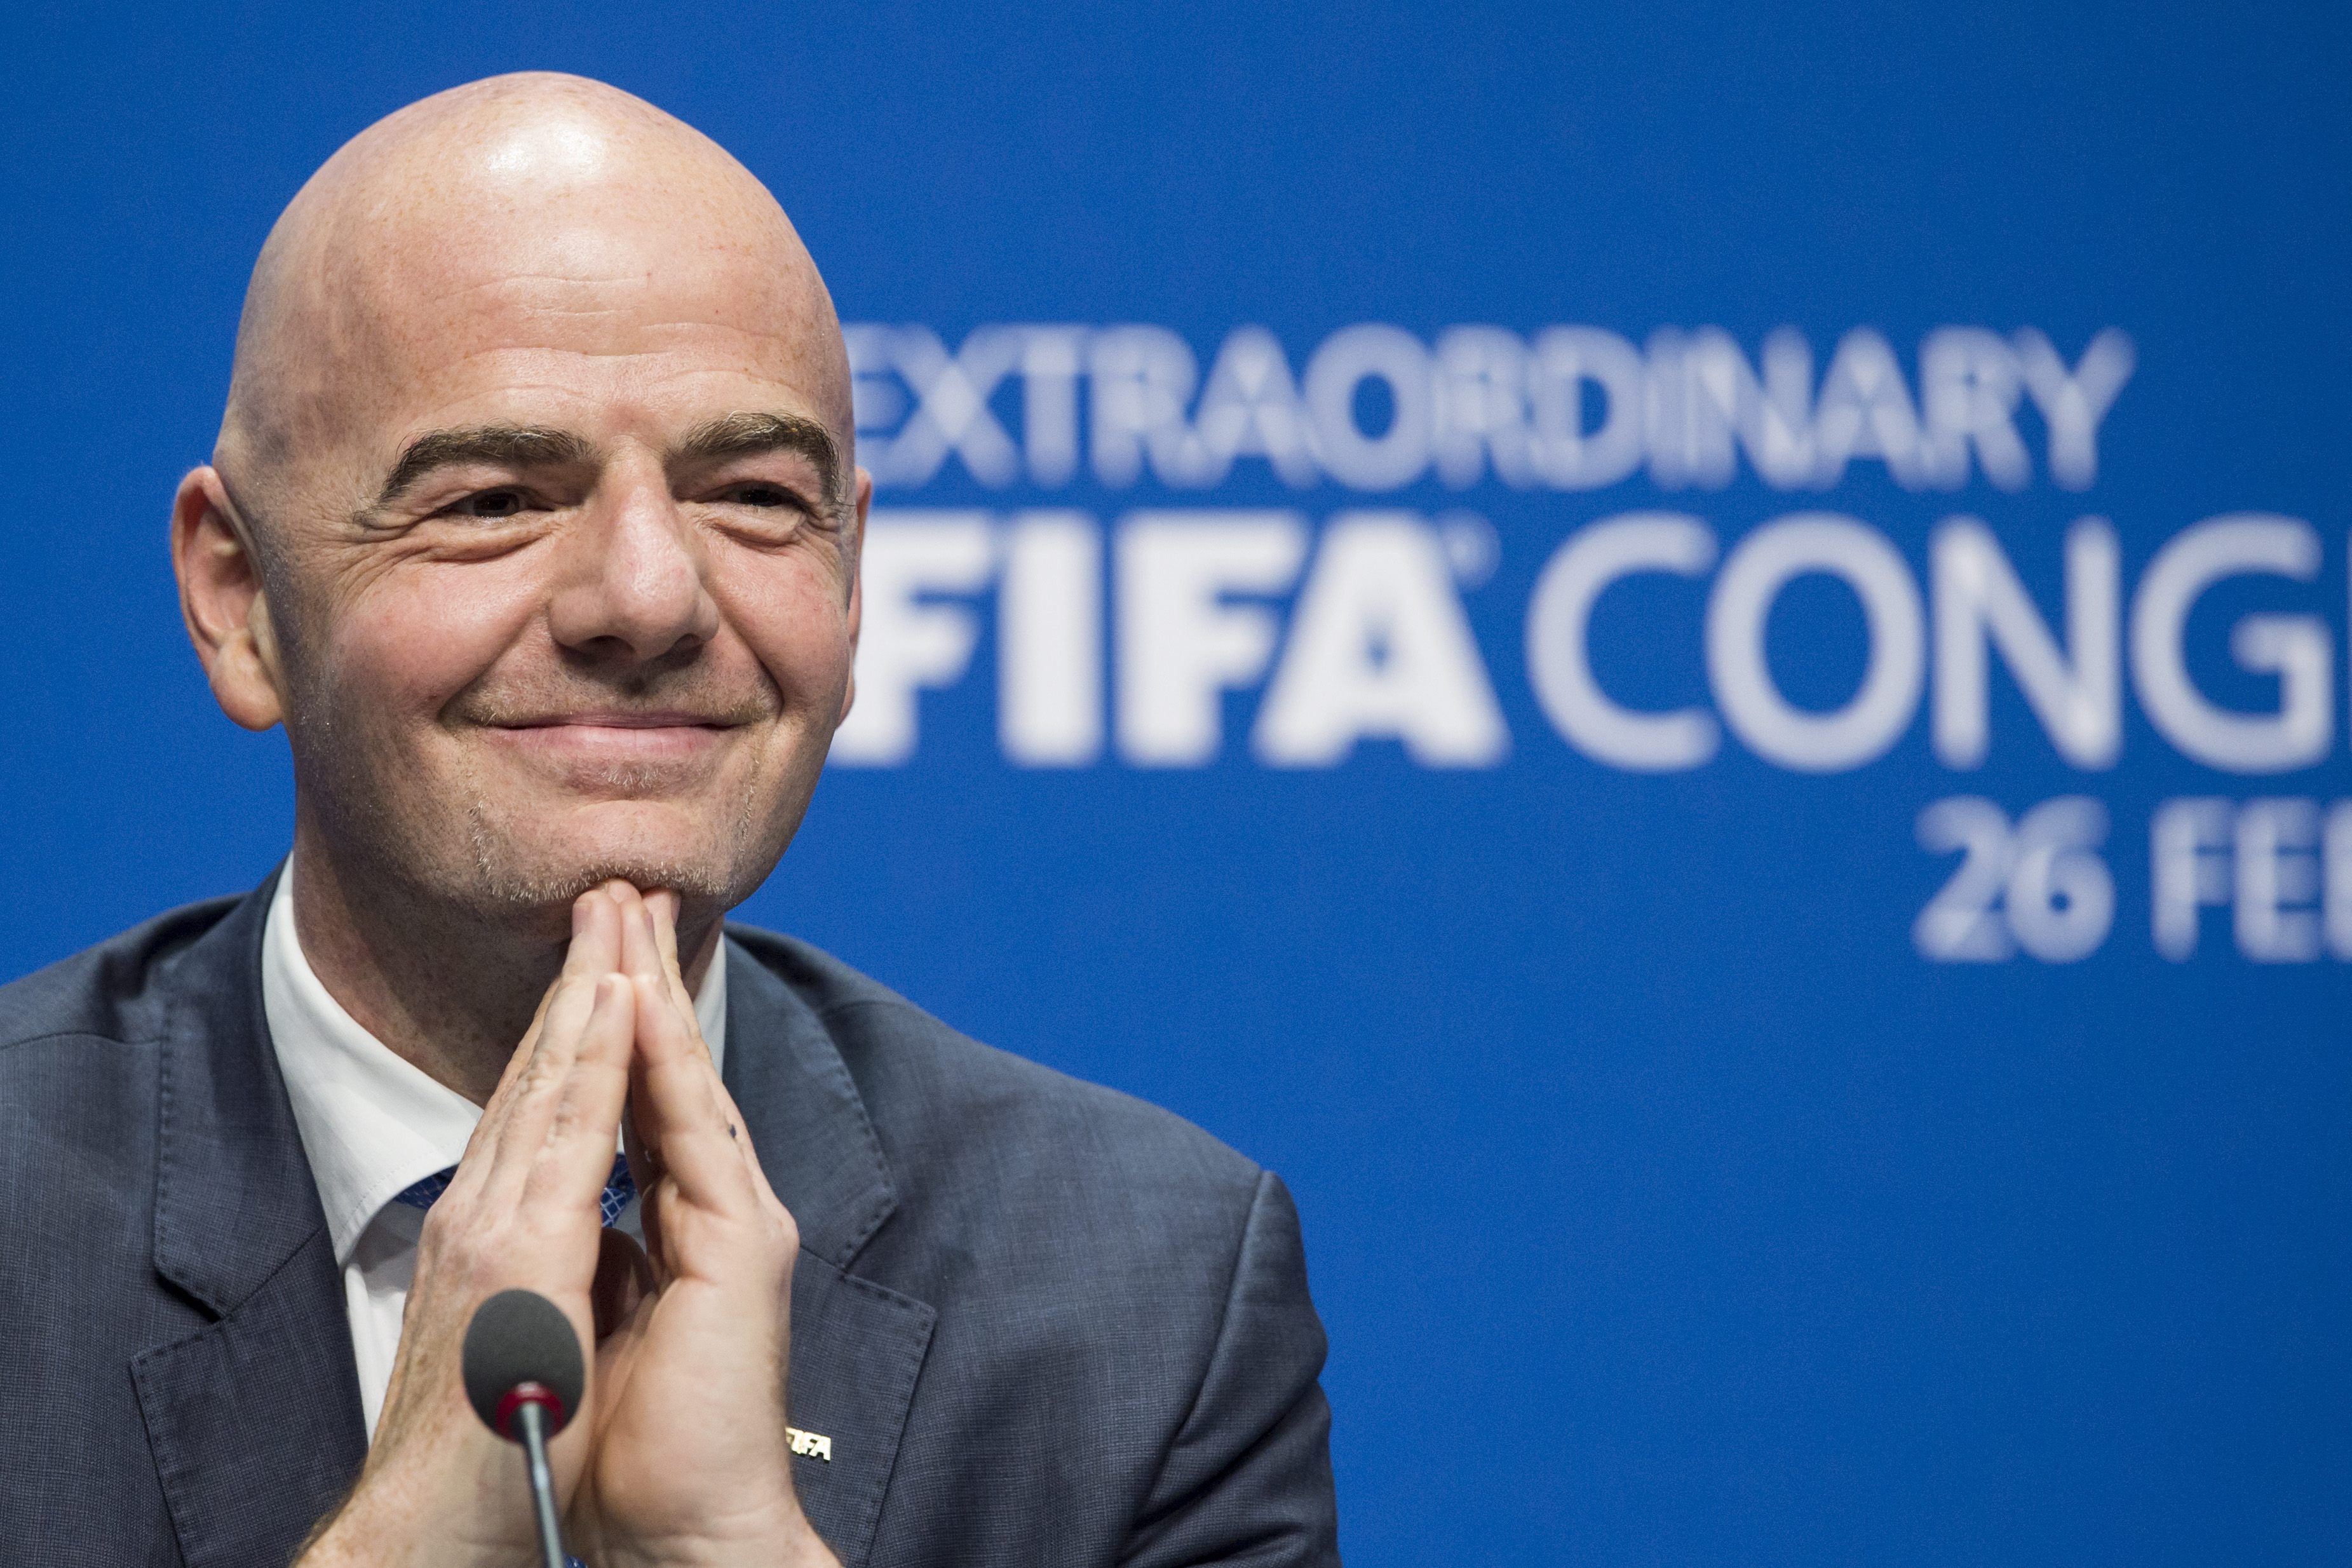 Gianni Infantino of Switzerland is shown during a press conference after being elected the new Fifa president during the Extraordinary Fifa Congress 2016 at the Hallenstadion in Zurich, Switzerland on Friday. Photo: EPA